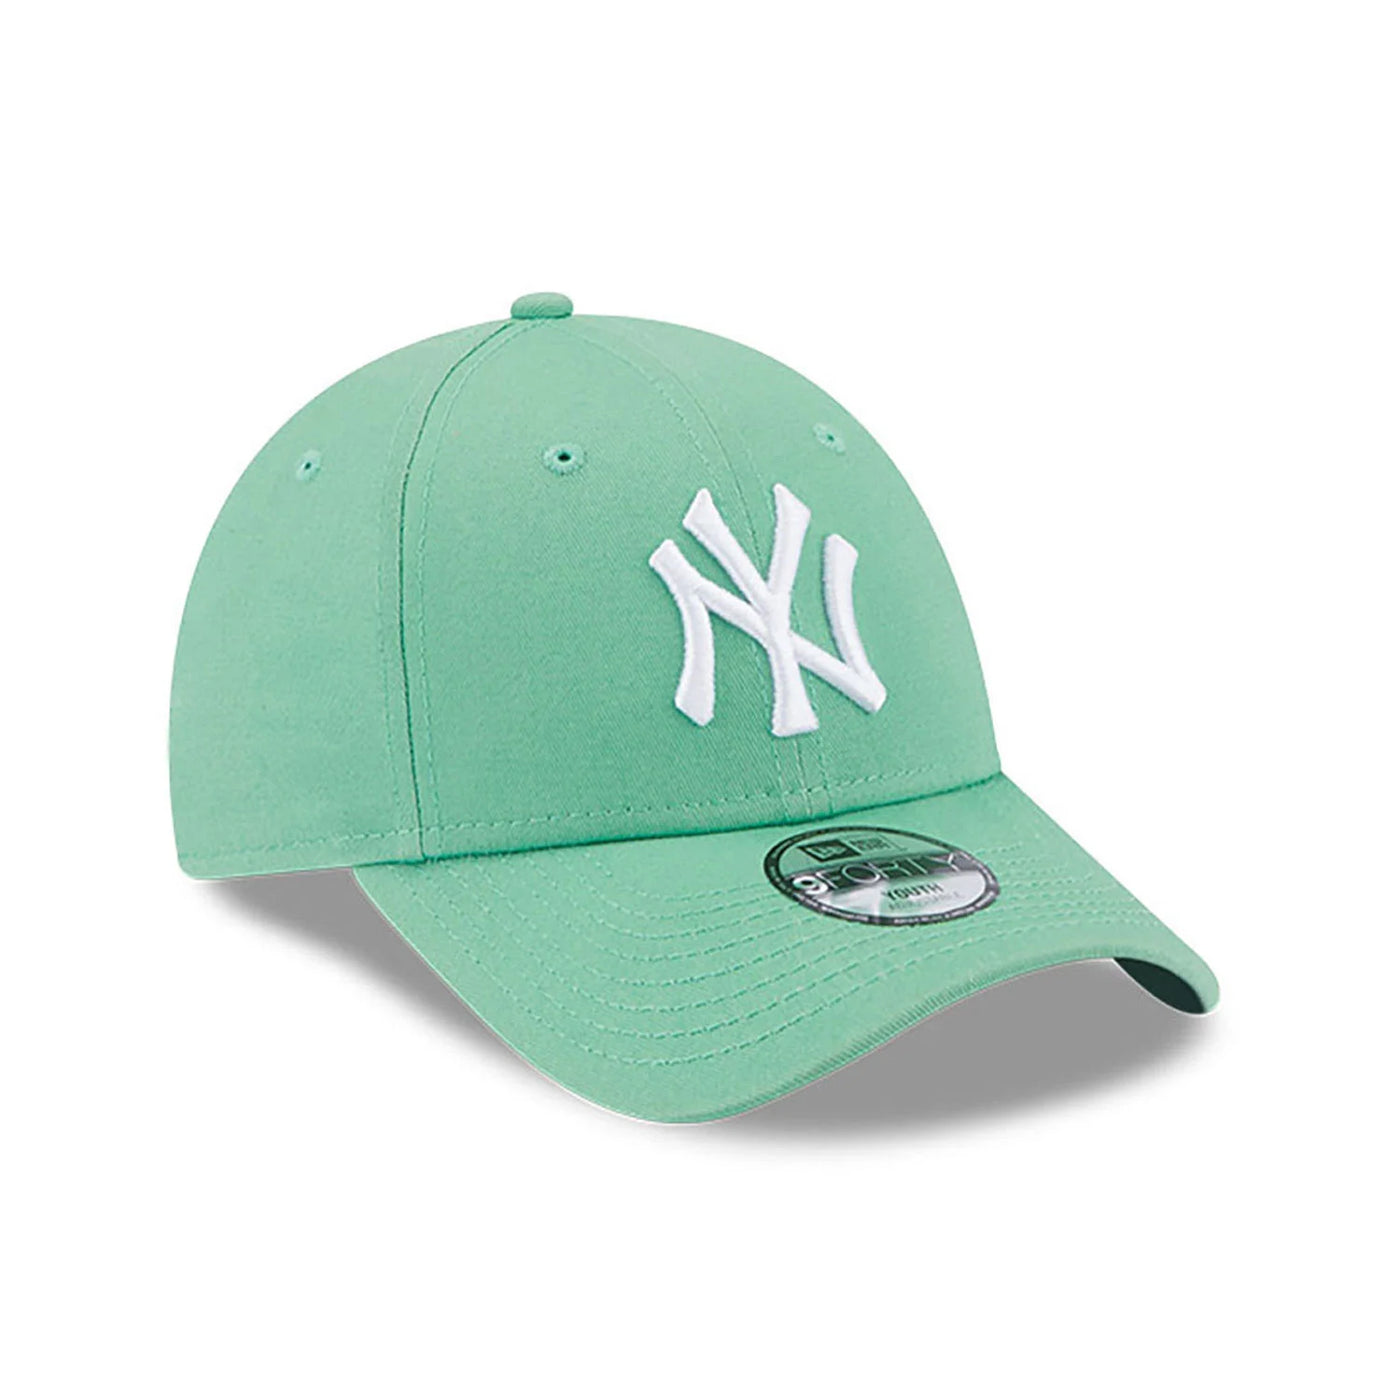 CAPPELLO NEW YORK YANKEES LEAGUE ESSENTIAL YOUTH GREEN 9FORTY ADJUSTABLE CAP NEW ERA BAMBINO